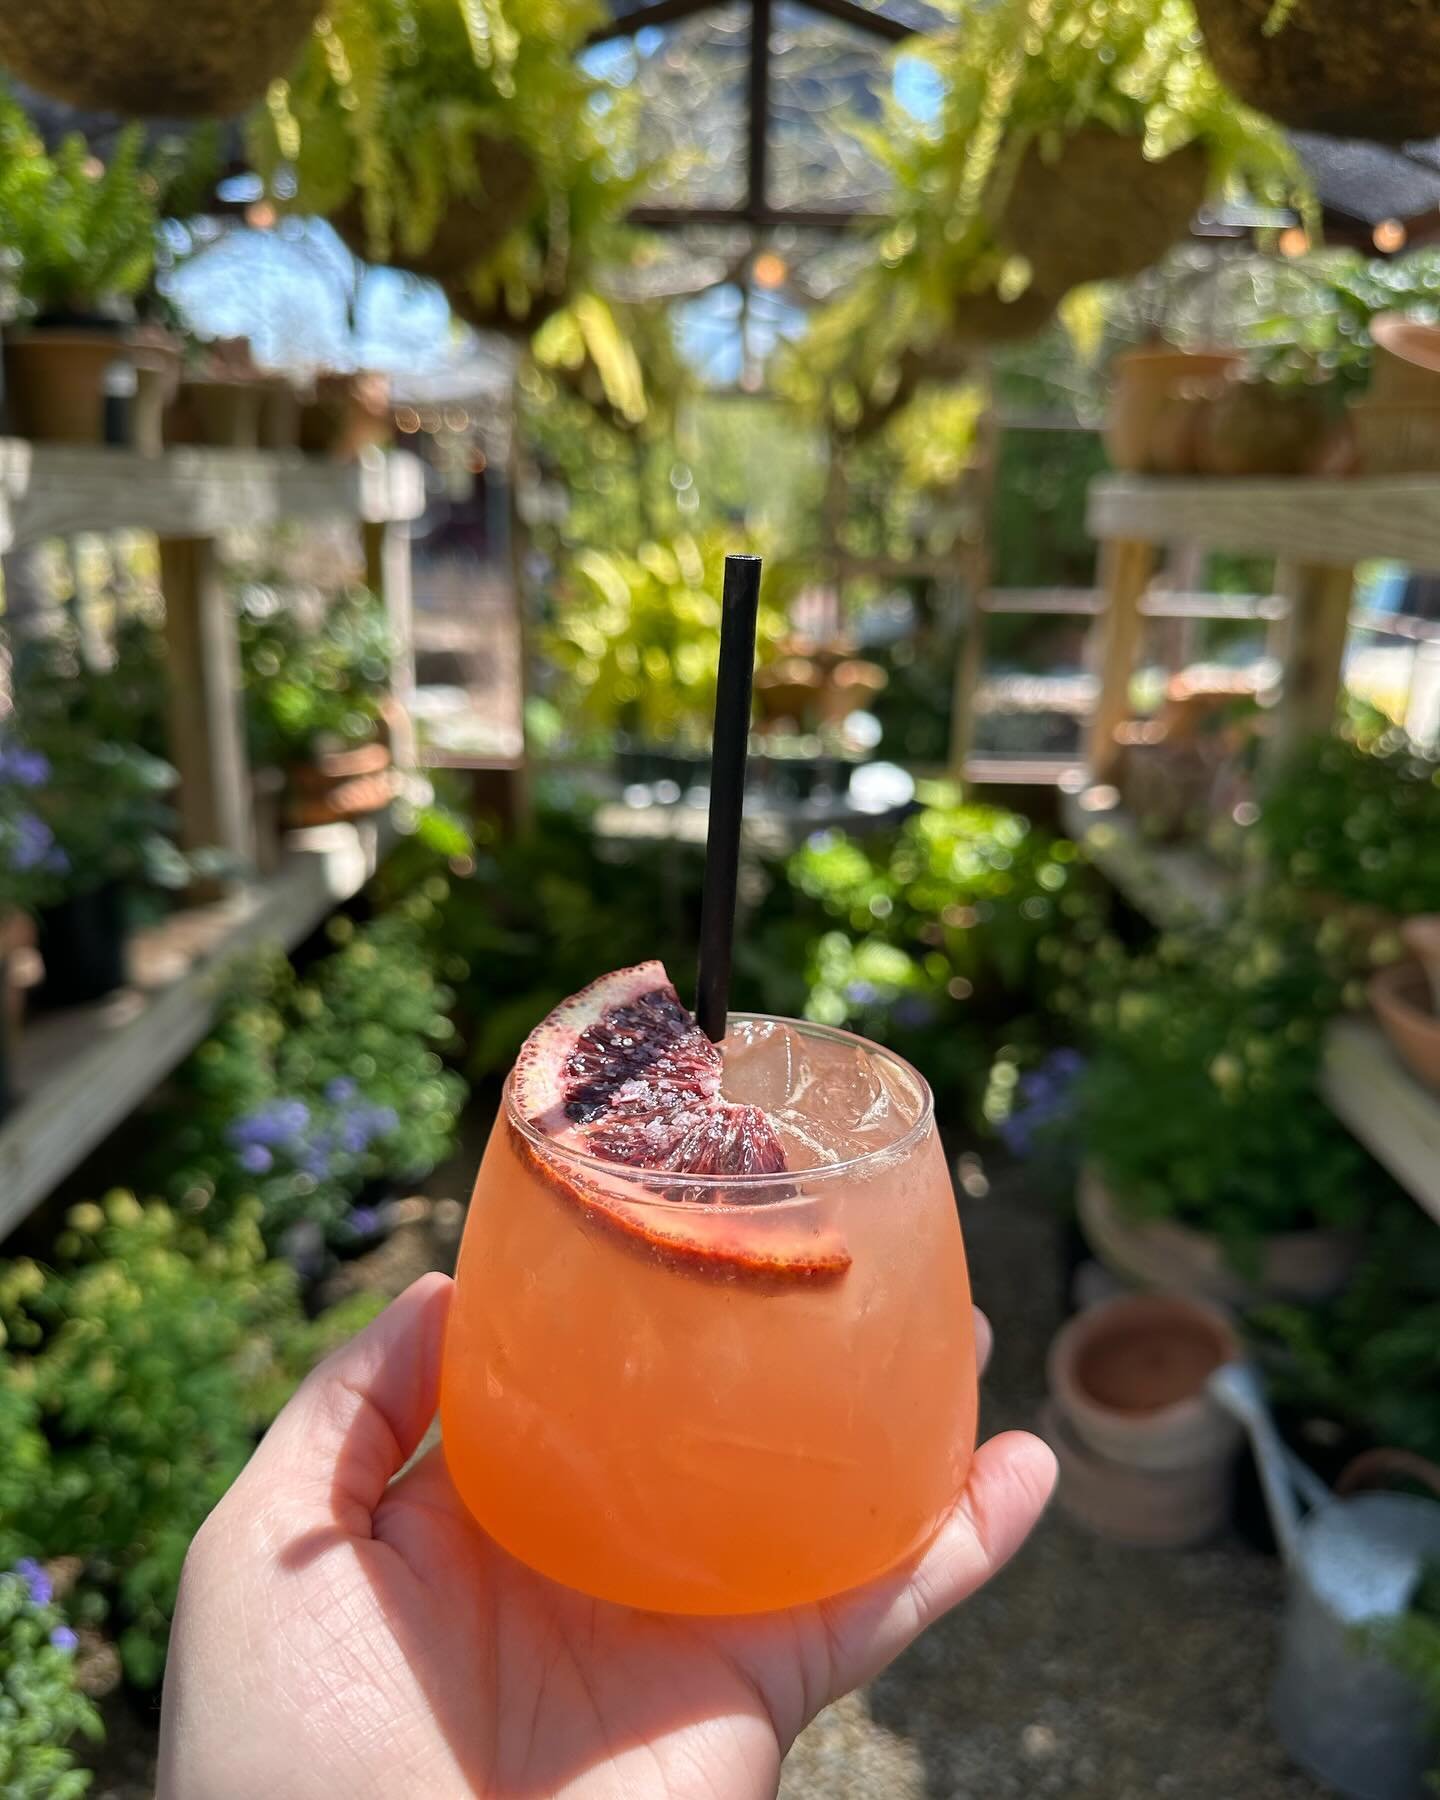 Need the perfect cocktail for the perfect Spring day?🍹 Try our Blood Orange Margarita, with ingredients including fresh cold pressed blood orange juice, silver tequila, and garnished with a sprinkle of flaky sea salt. CHEERS to that!

Our bar is ope